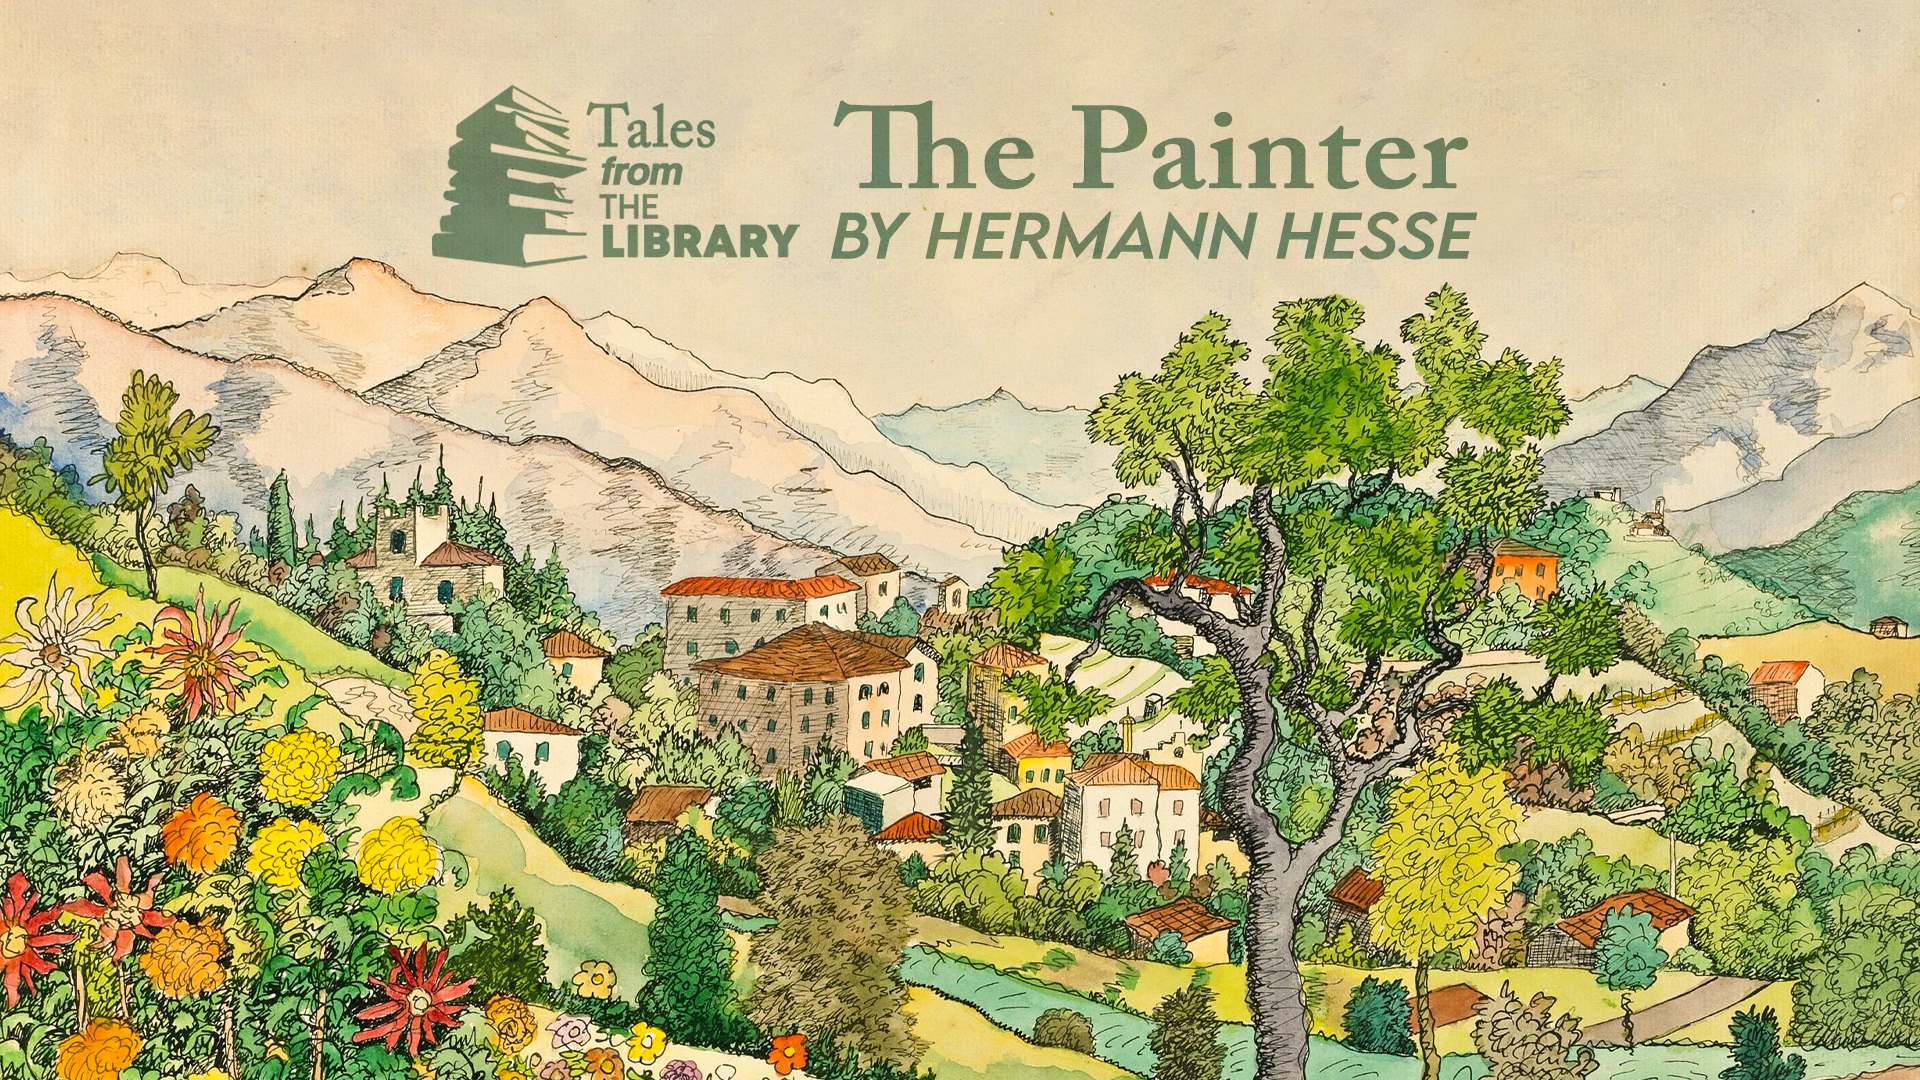 Tales From The Library - The Painter